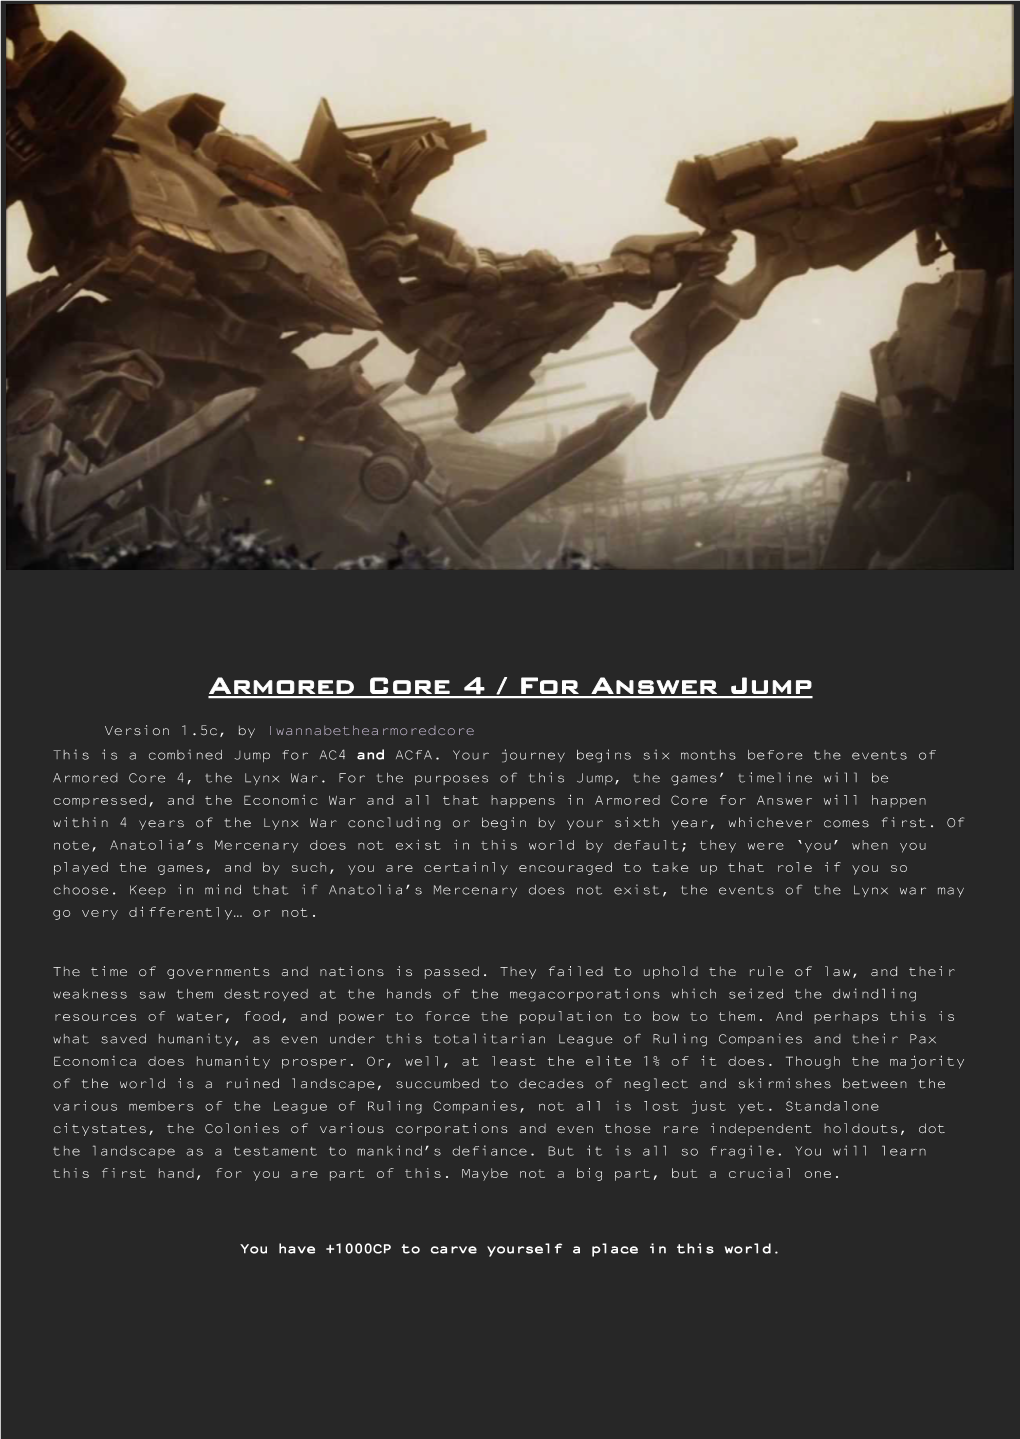 Armored Core 4 / for Answer Jump